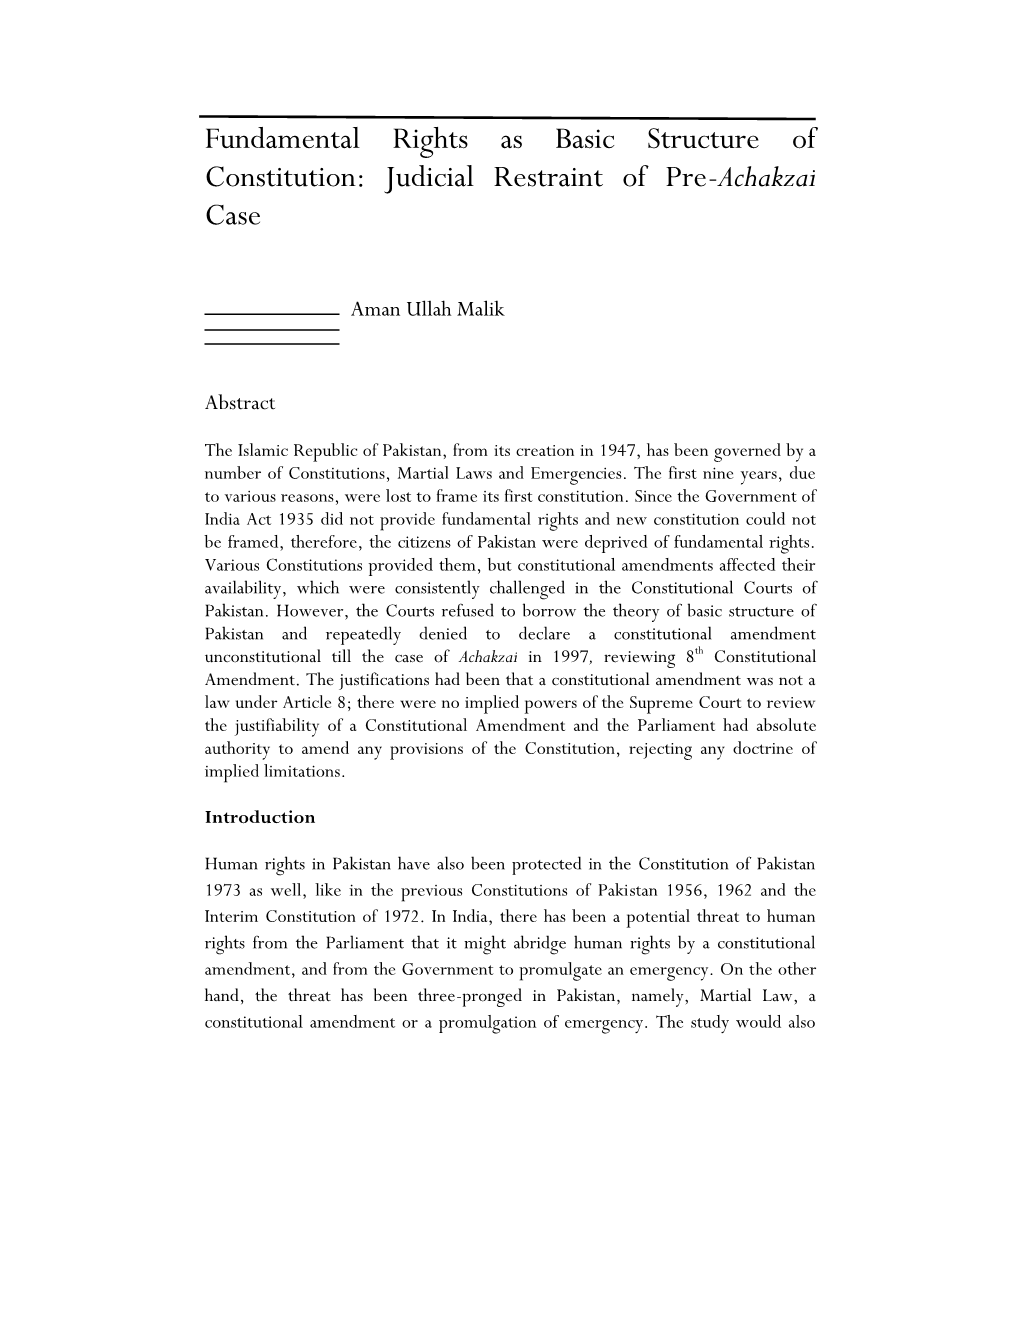 Fundamental Rights As Basic Structure of Constitution: Judicial Restraint of Pre-Achakzai Case